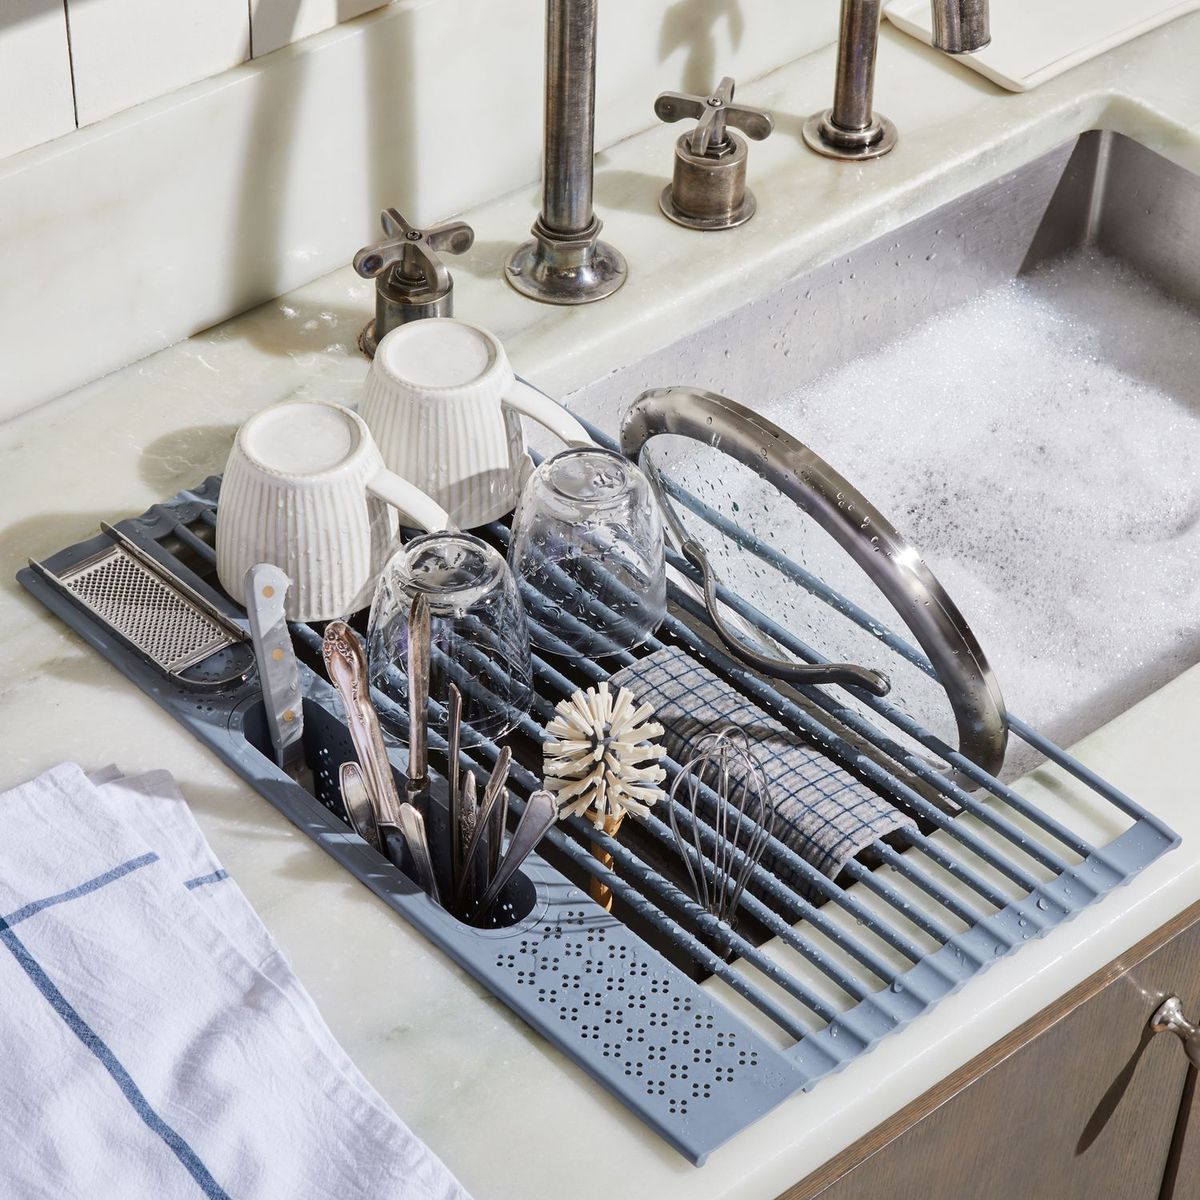 Silicone over the Sink Dish Rack with Caddy